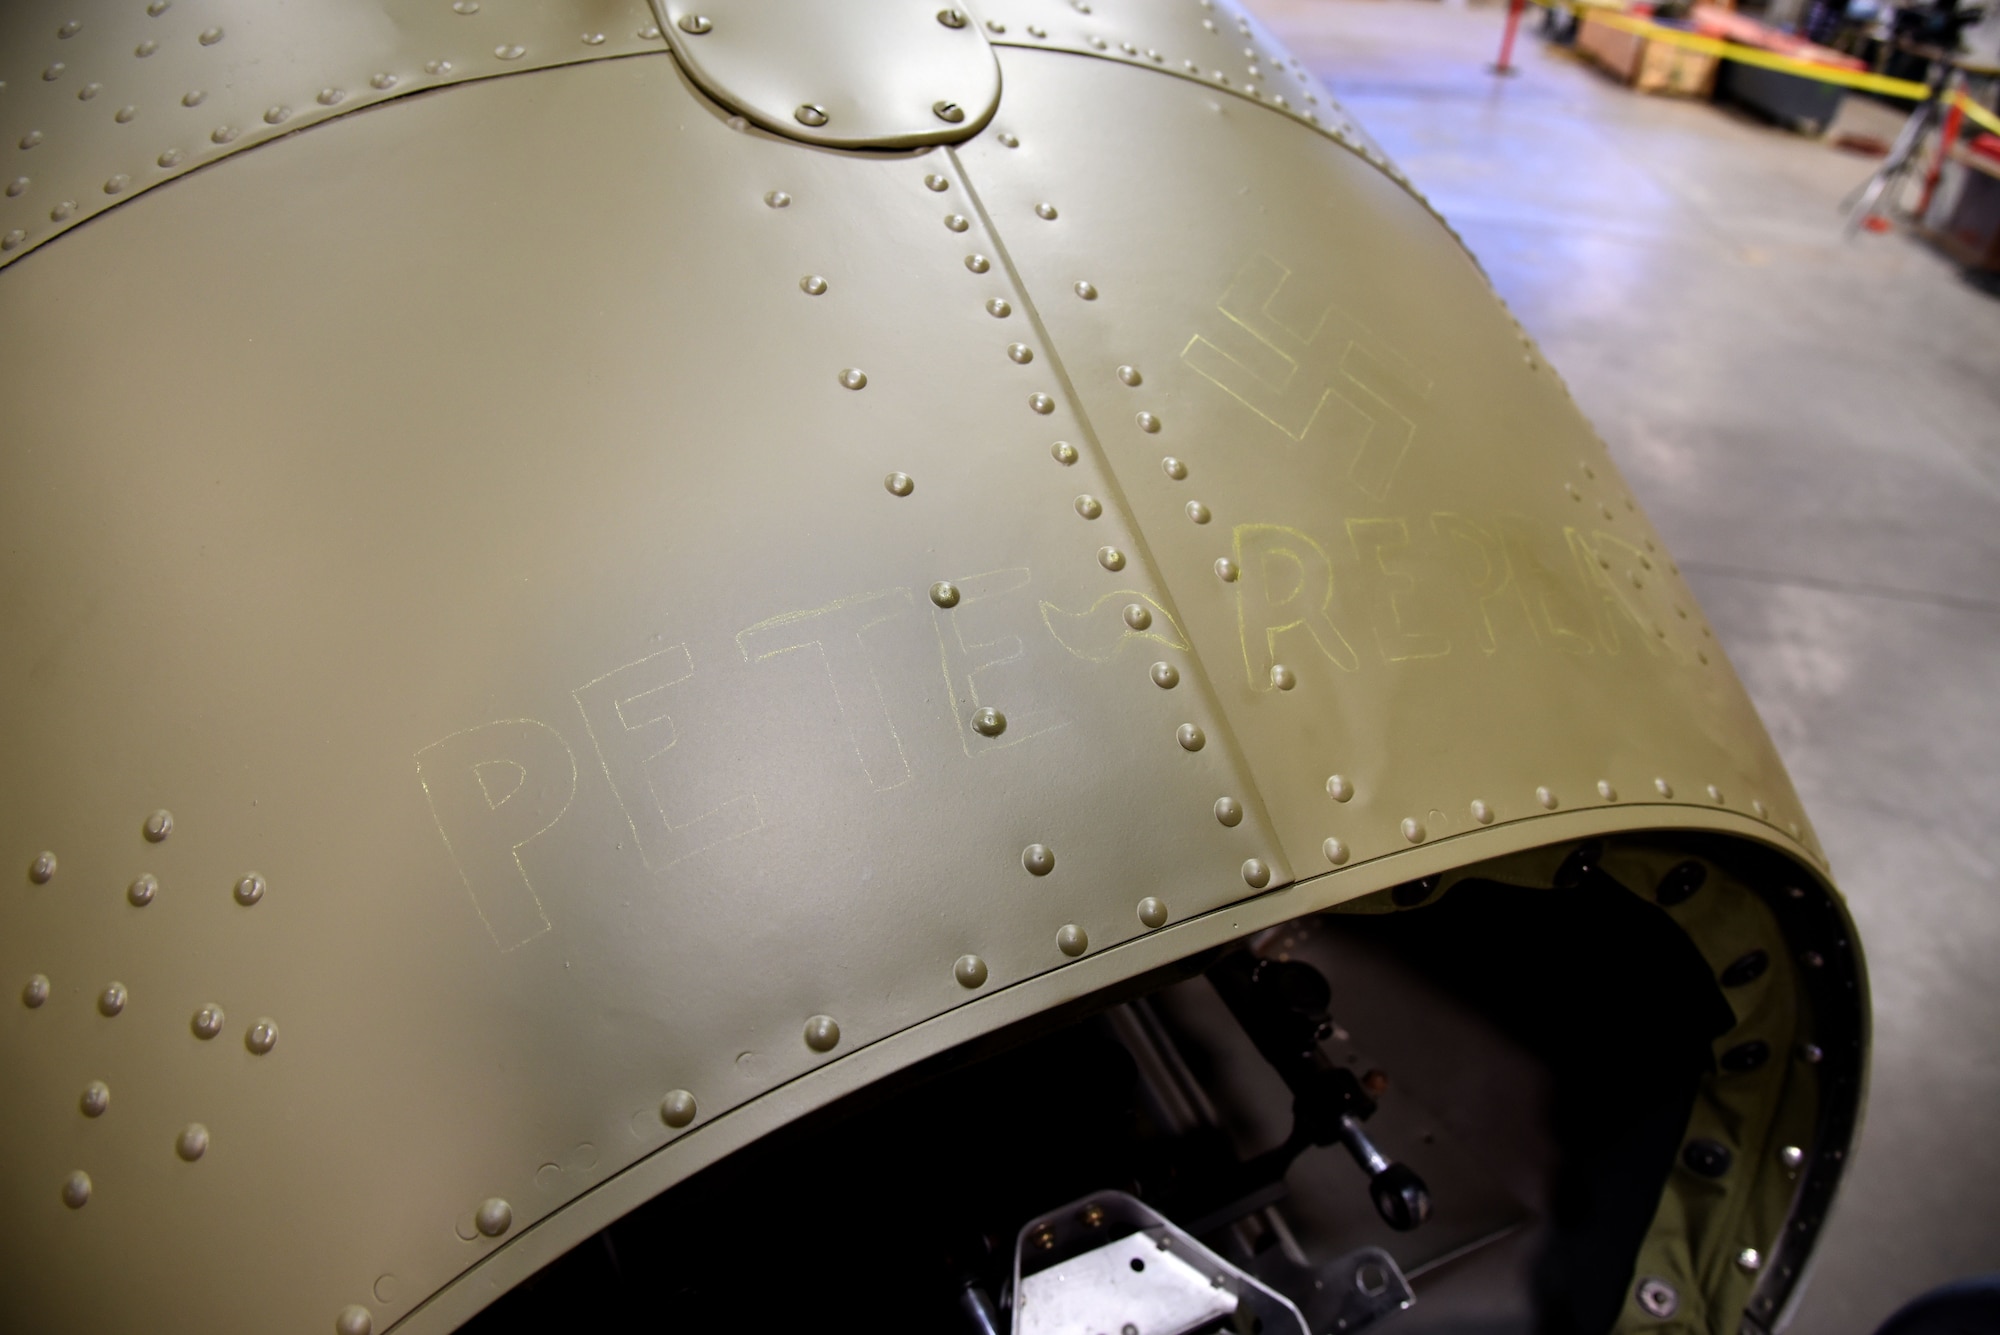 (02/01/2018) A view of the Boeing B-17F Memphis Belle tail gun position in the museum's restoration hangar. SSgt. John Quinlan the tail gunner of the Memphis Belle crew named the guns Pete and Repeat during WWII. Museum restoration specialist Casey Simmons repainted the names on the tail. (U.S. Air Force photo by Ken LaRock)